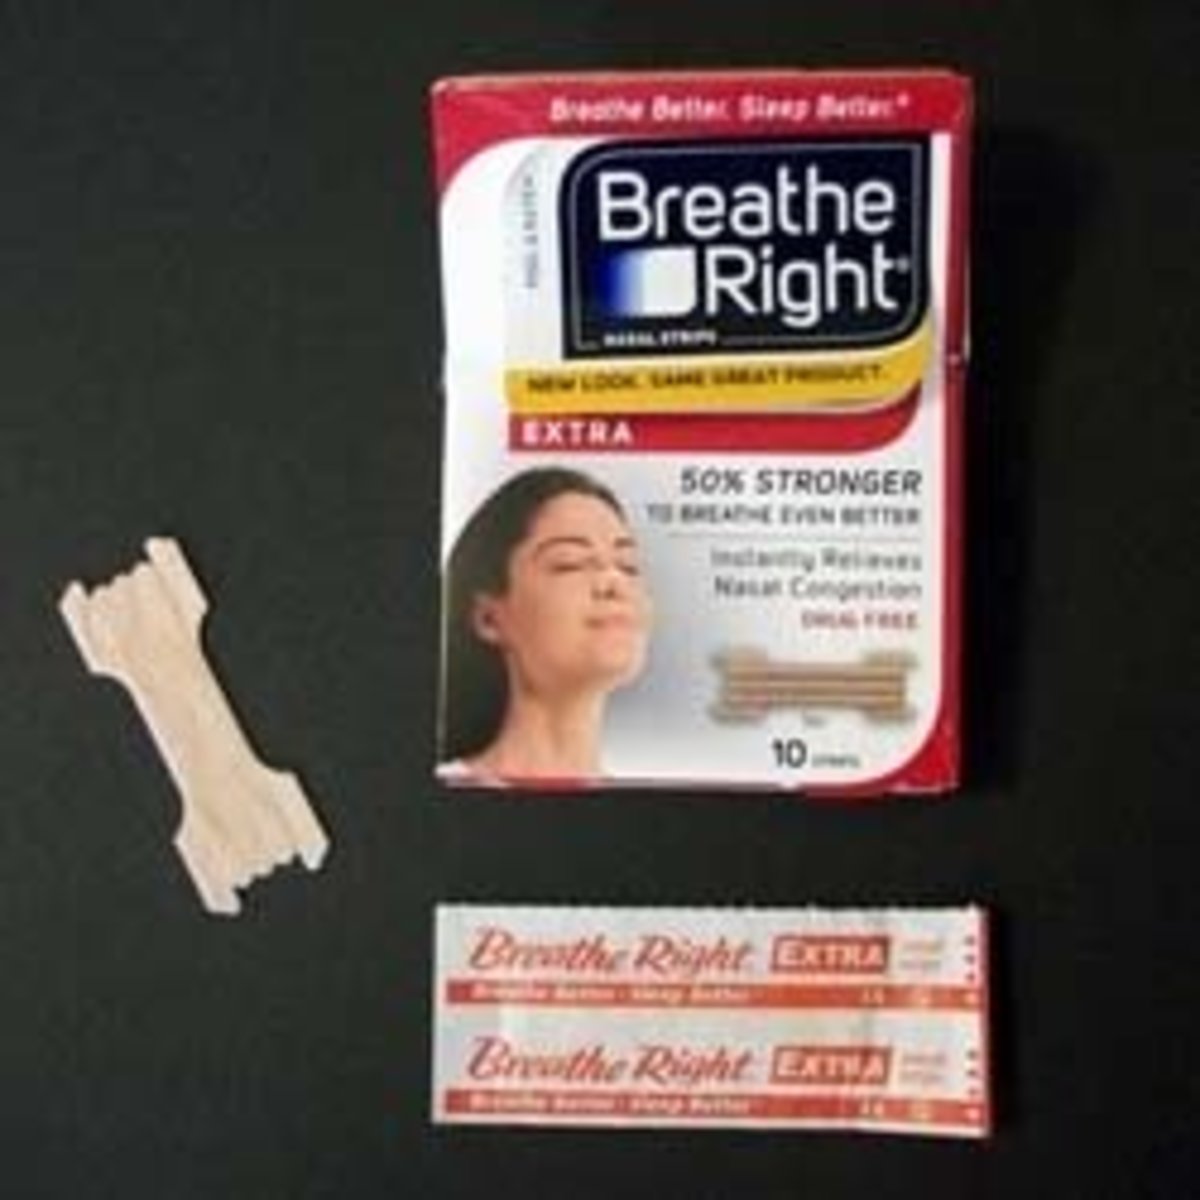 How to Remove a Breathe Right Strip That Sticks to Your Face